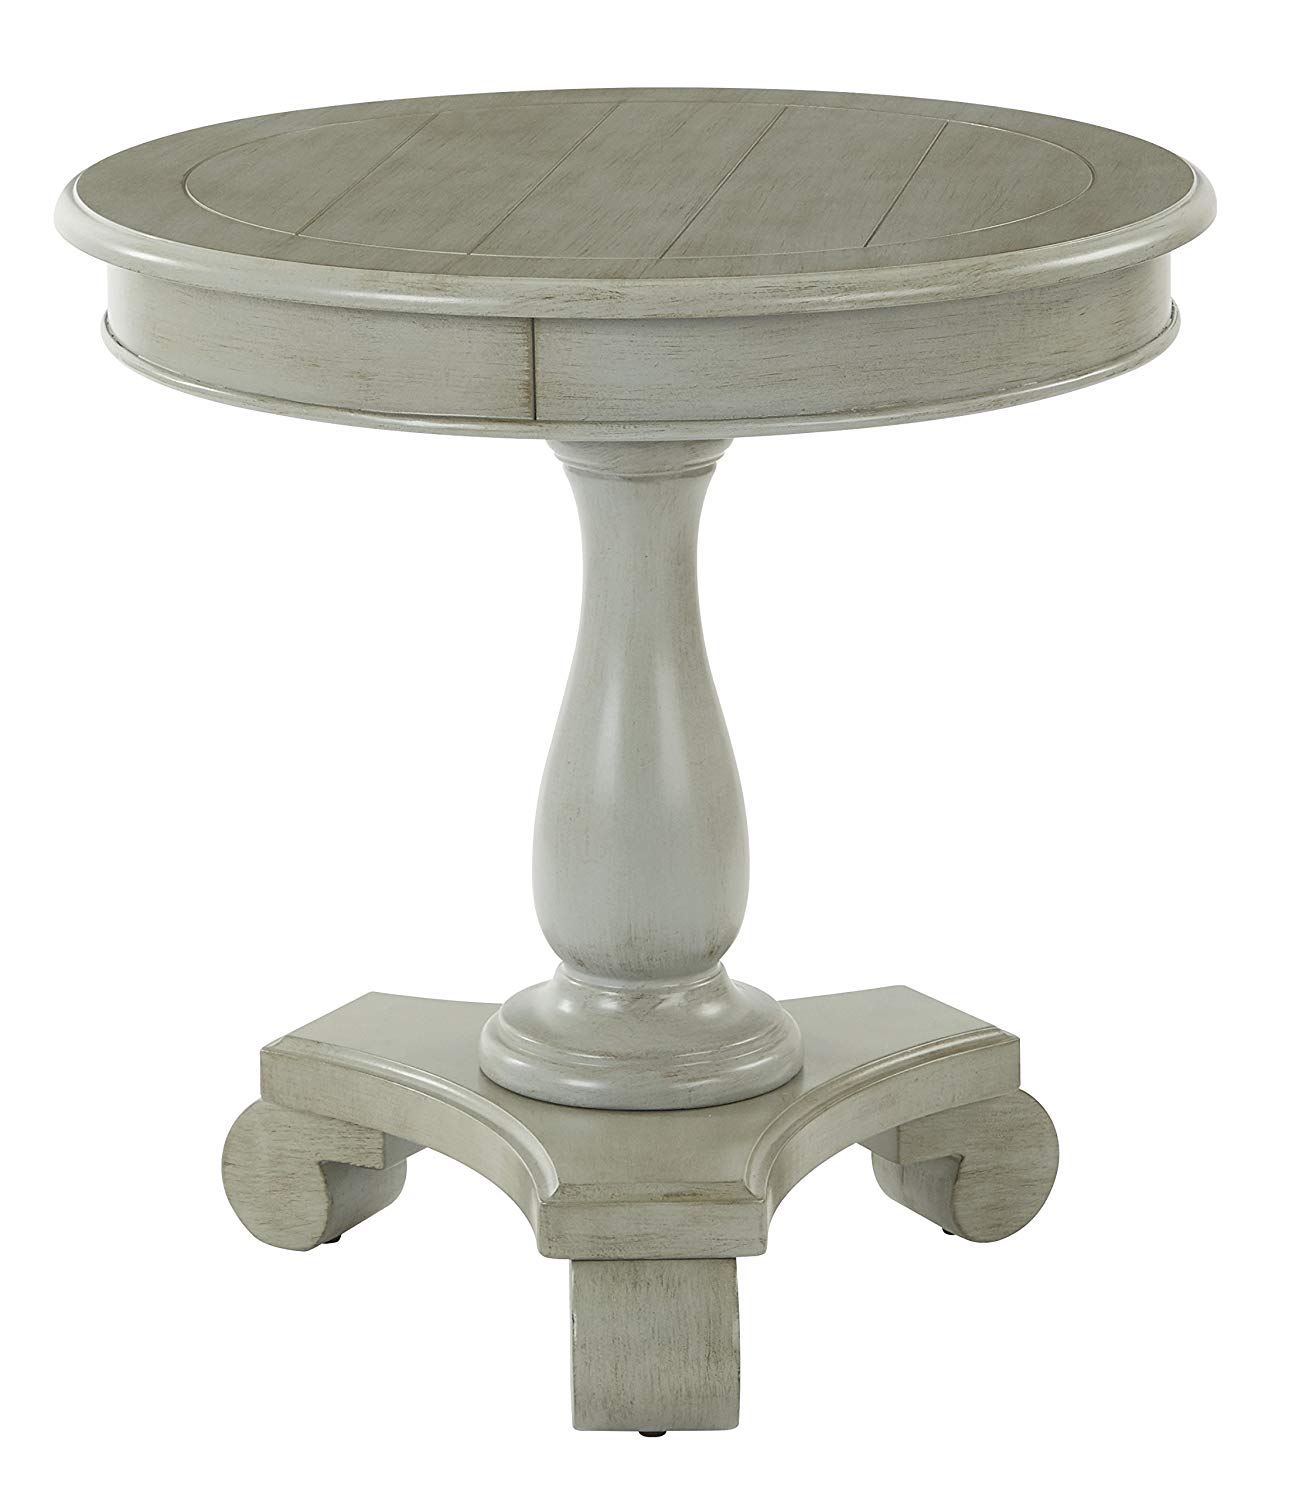 inspired bassett avlat osp avalon round accent table antique caledon kitchen dining bedroom end lamps dog grooming side over sofa arm battery operated indoor vanity furniture